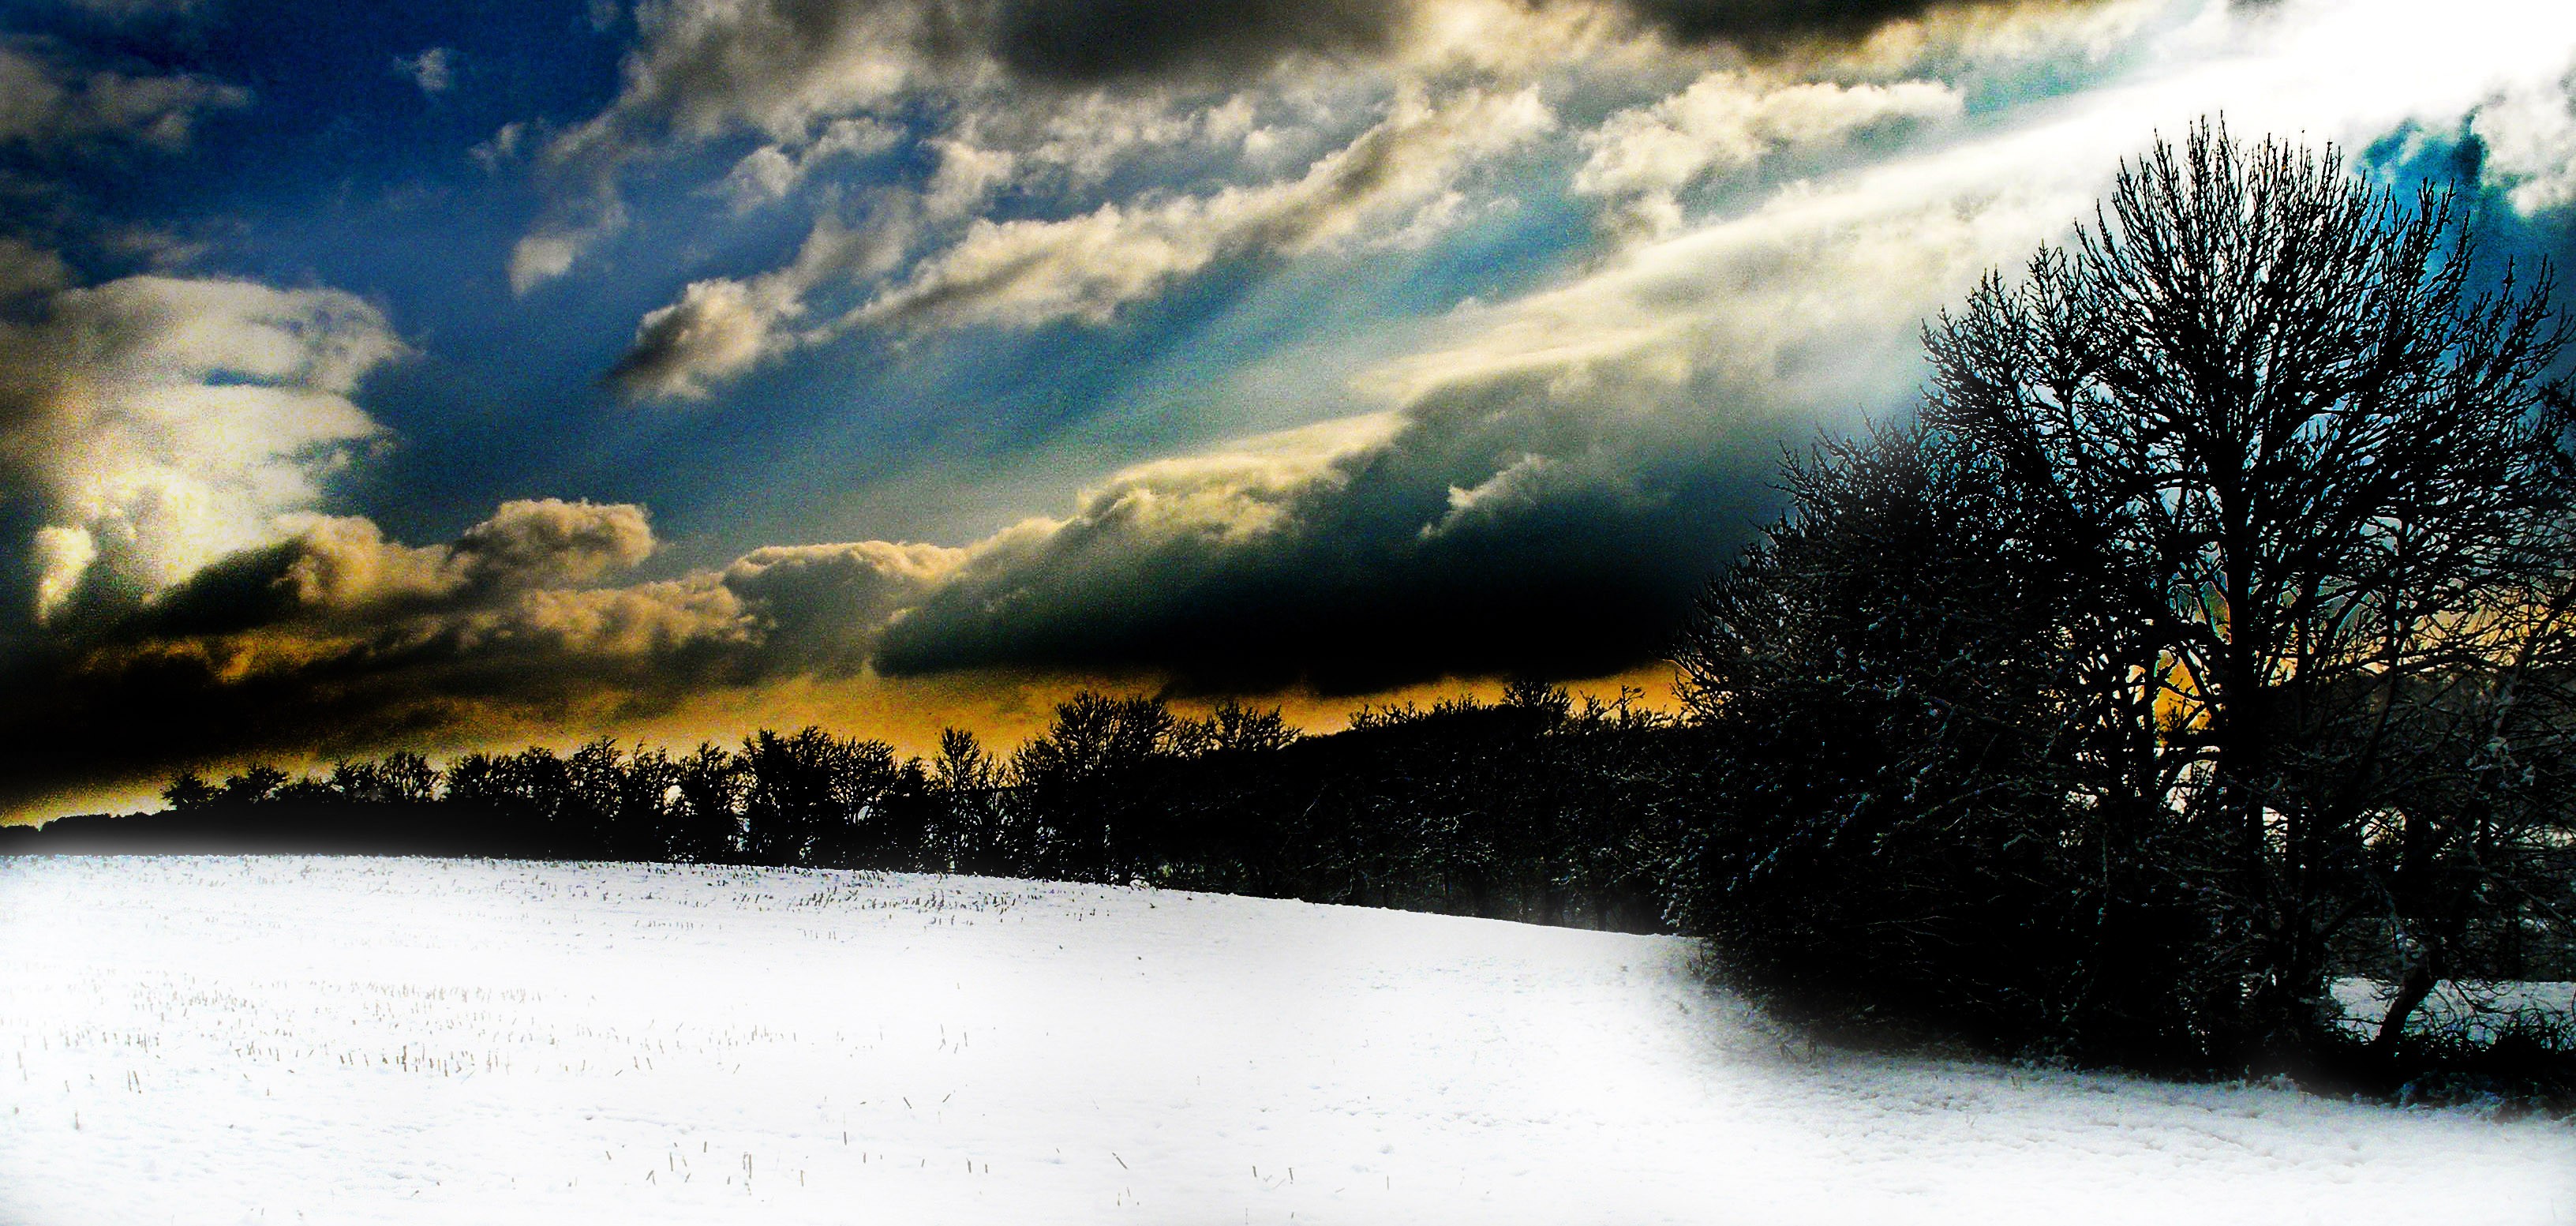 General 3264x1553 nature landscape dark snow winter cold outdoors sky